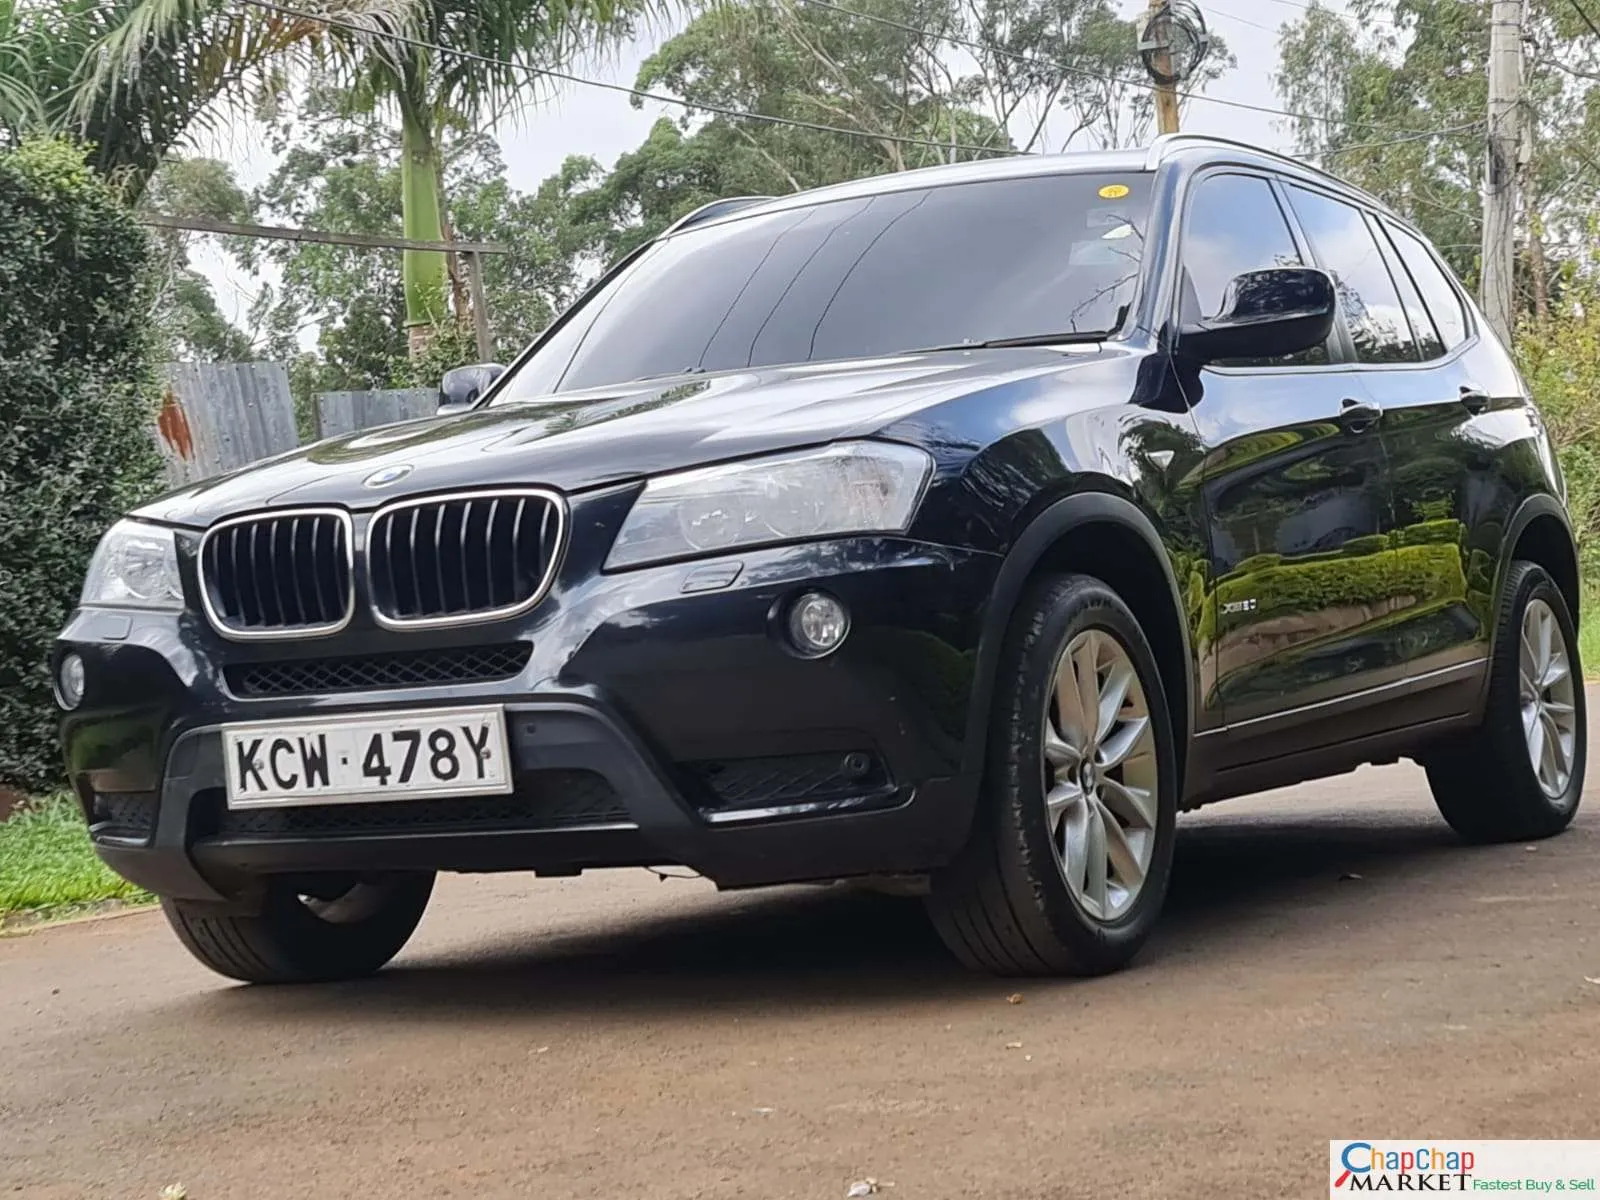 [Sub-categories]-Bmw X3 for sale in Kenya Fully Loaded 🔥 You Pay 30% deposit Trade in Ok EXCLUSIVE 9